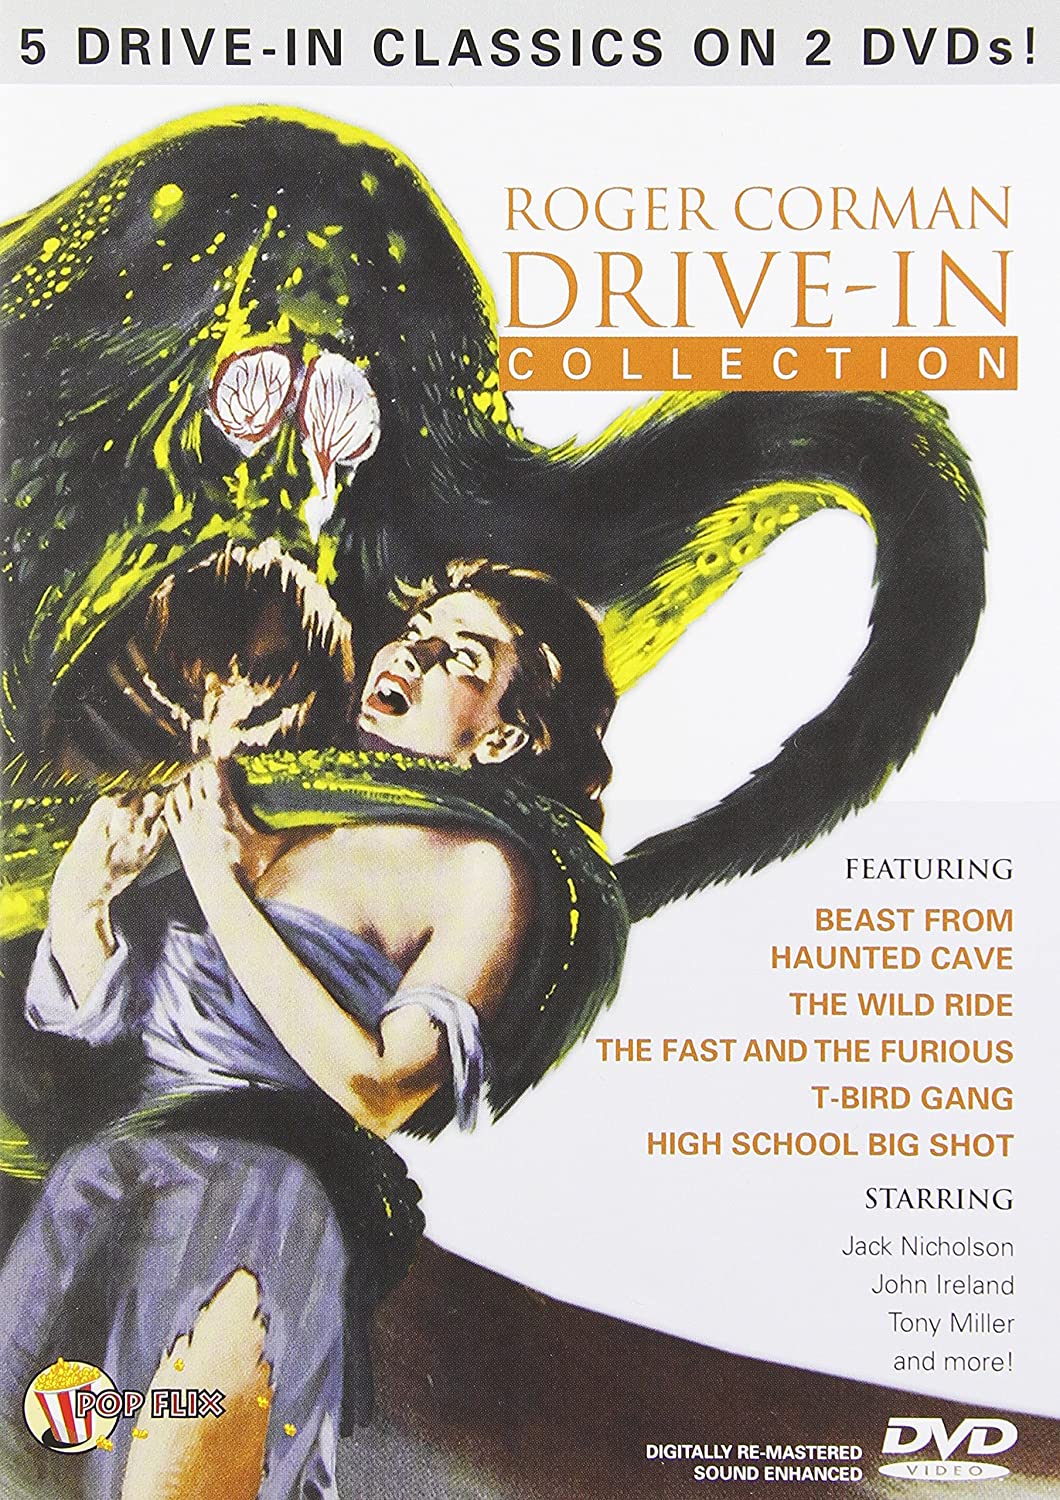 Roger Corman Drive-In Collection - Darkside Records